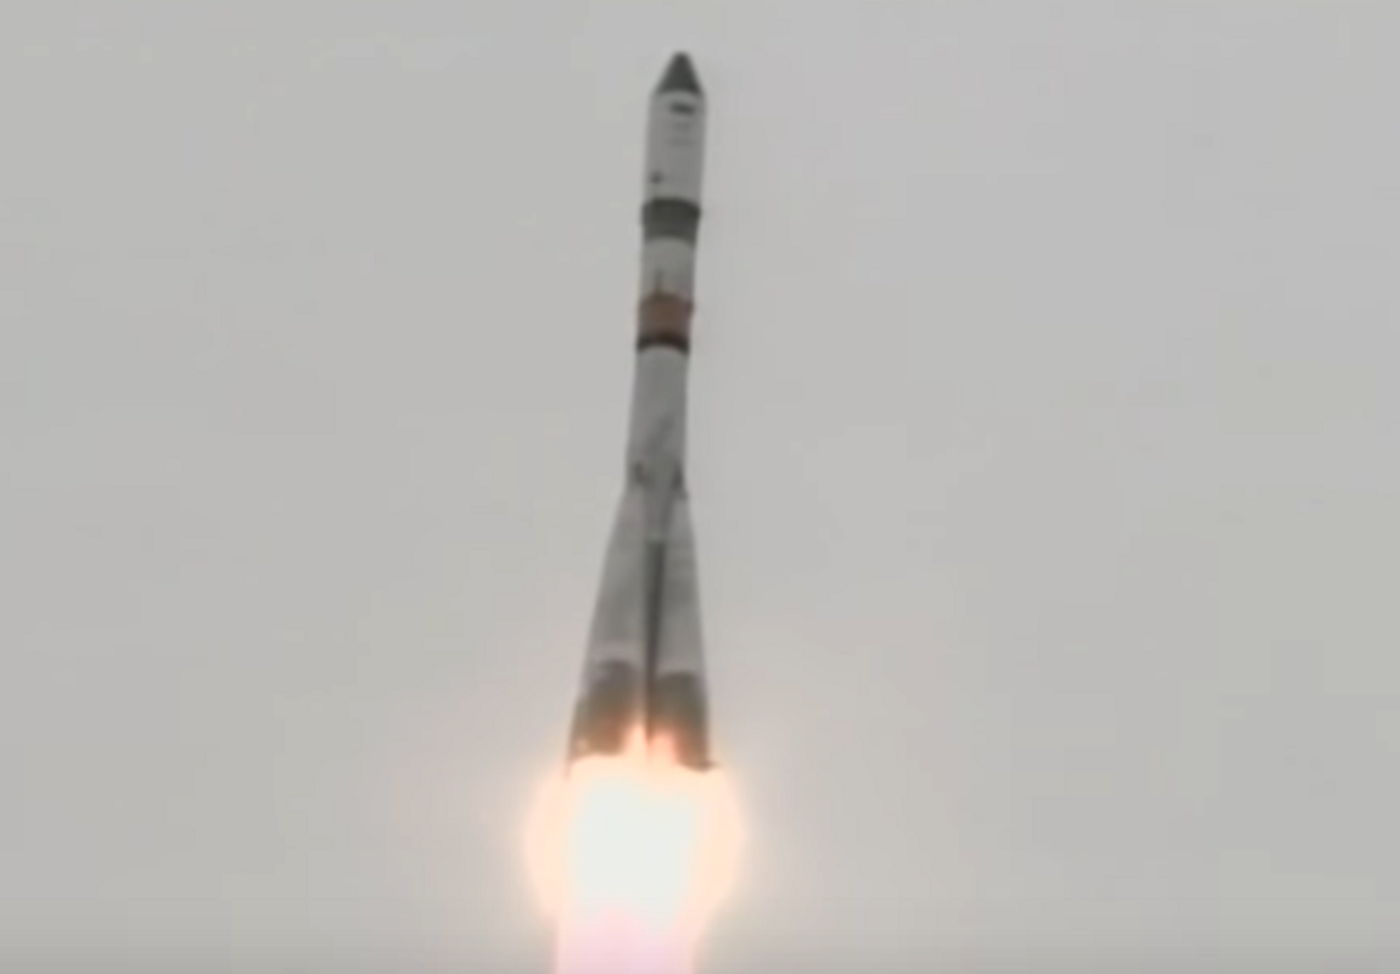 The Russian Progress MS-06 freighter launches atop a Soyuz rocket to re-supply the International Space Station.